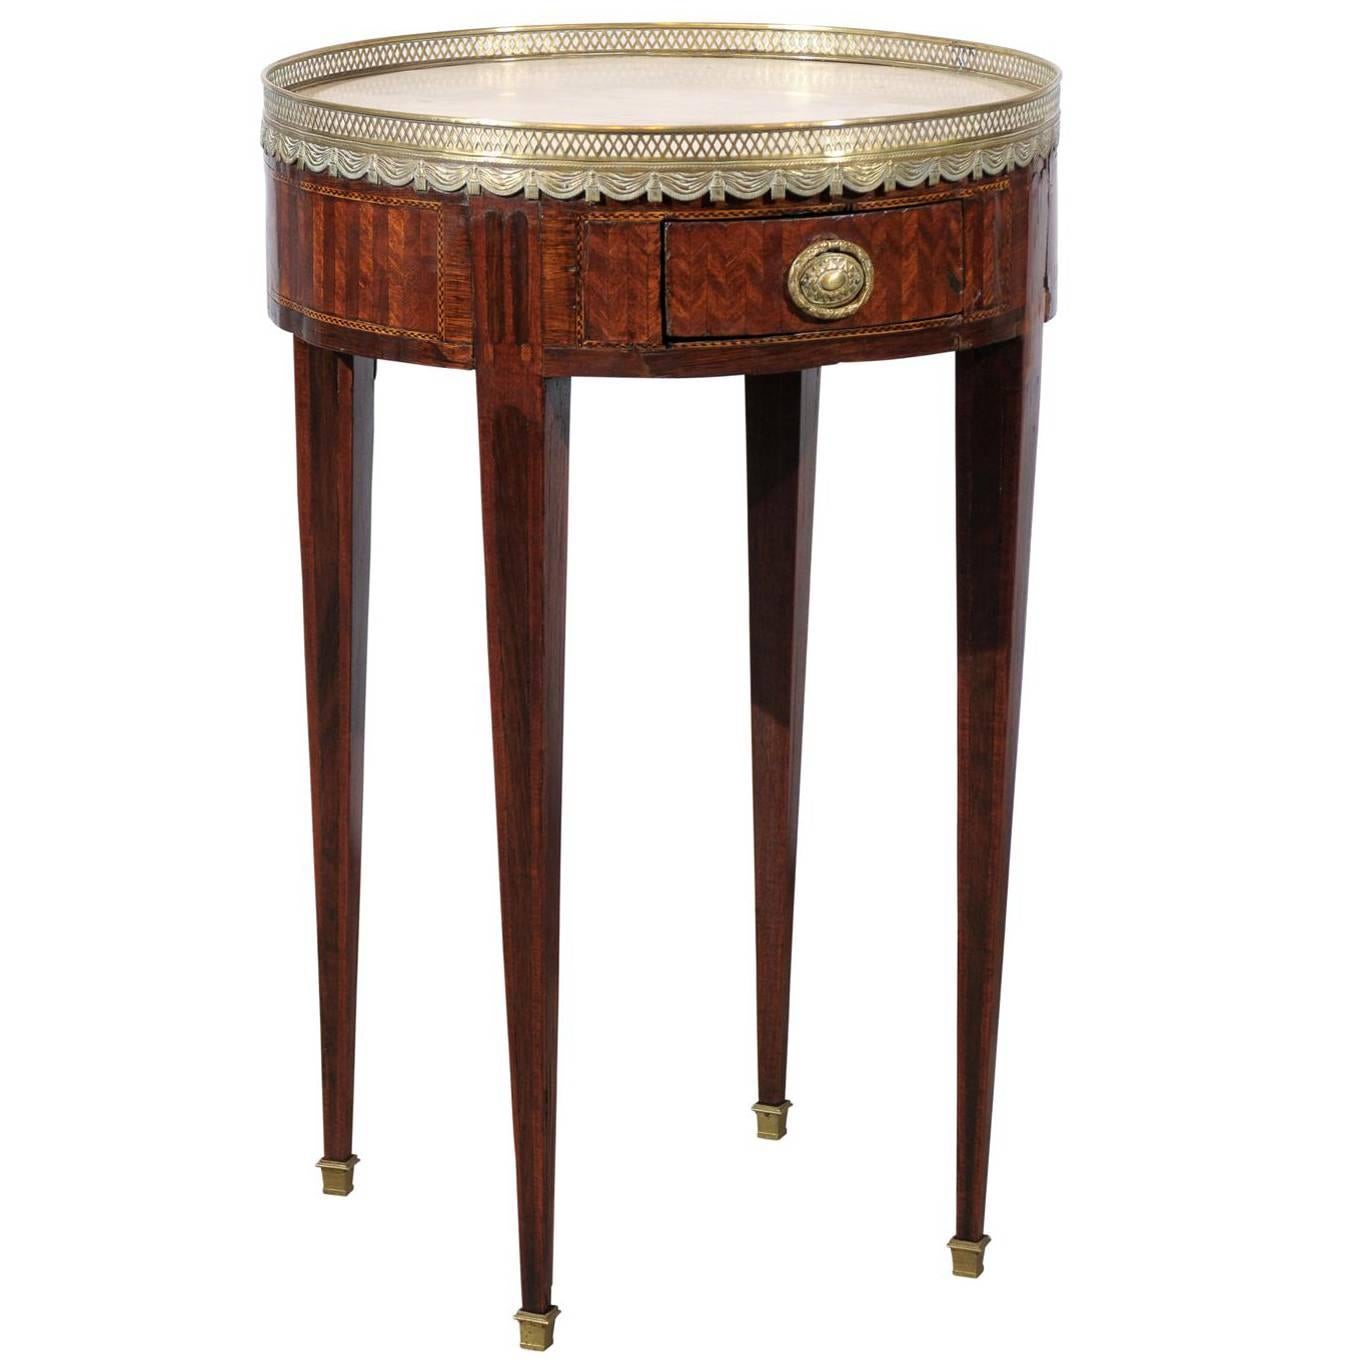 19th Century French Louis XVI Style Tulipwood Inlaid Marble Top Bouillotte Table